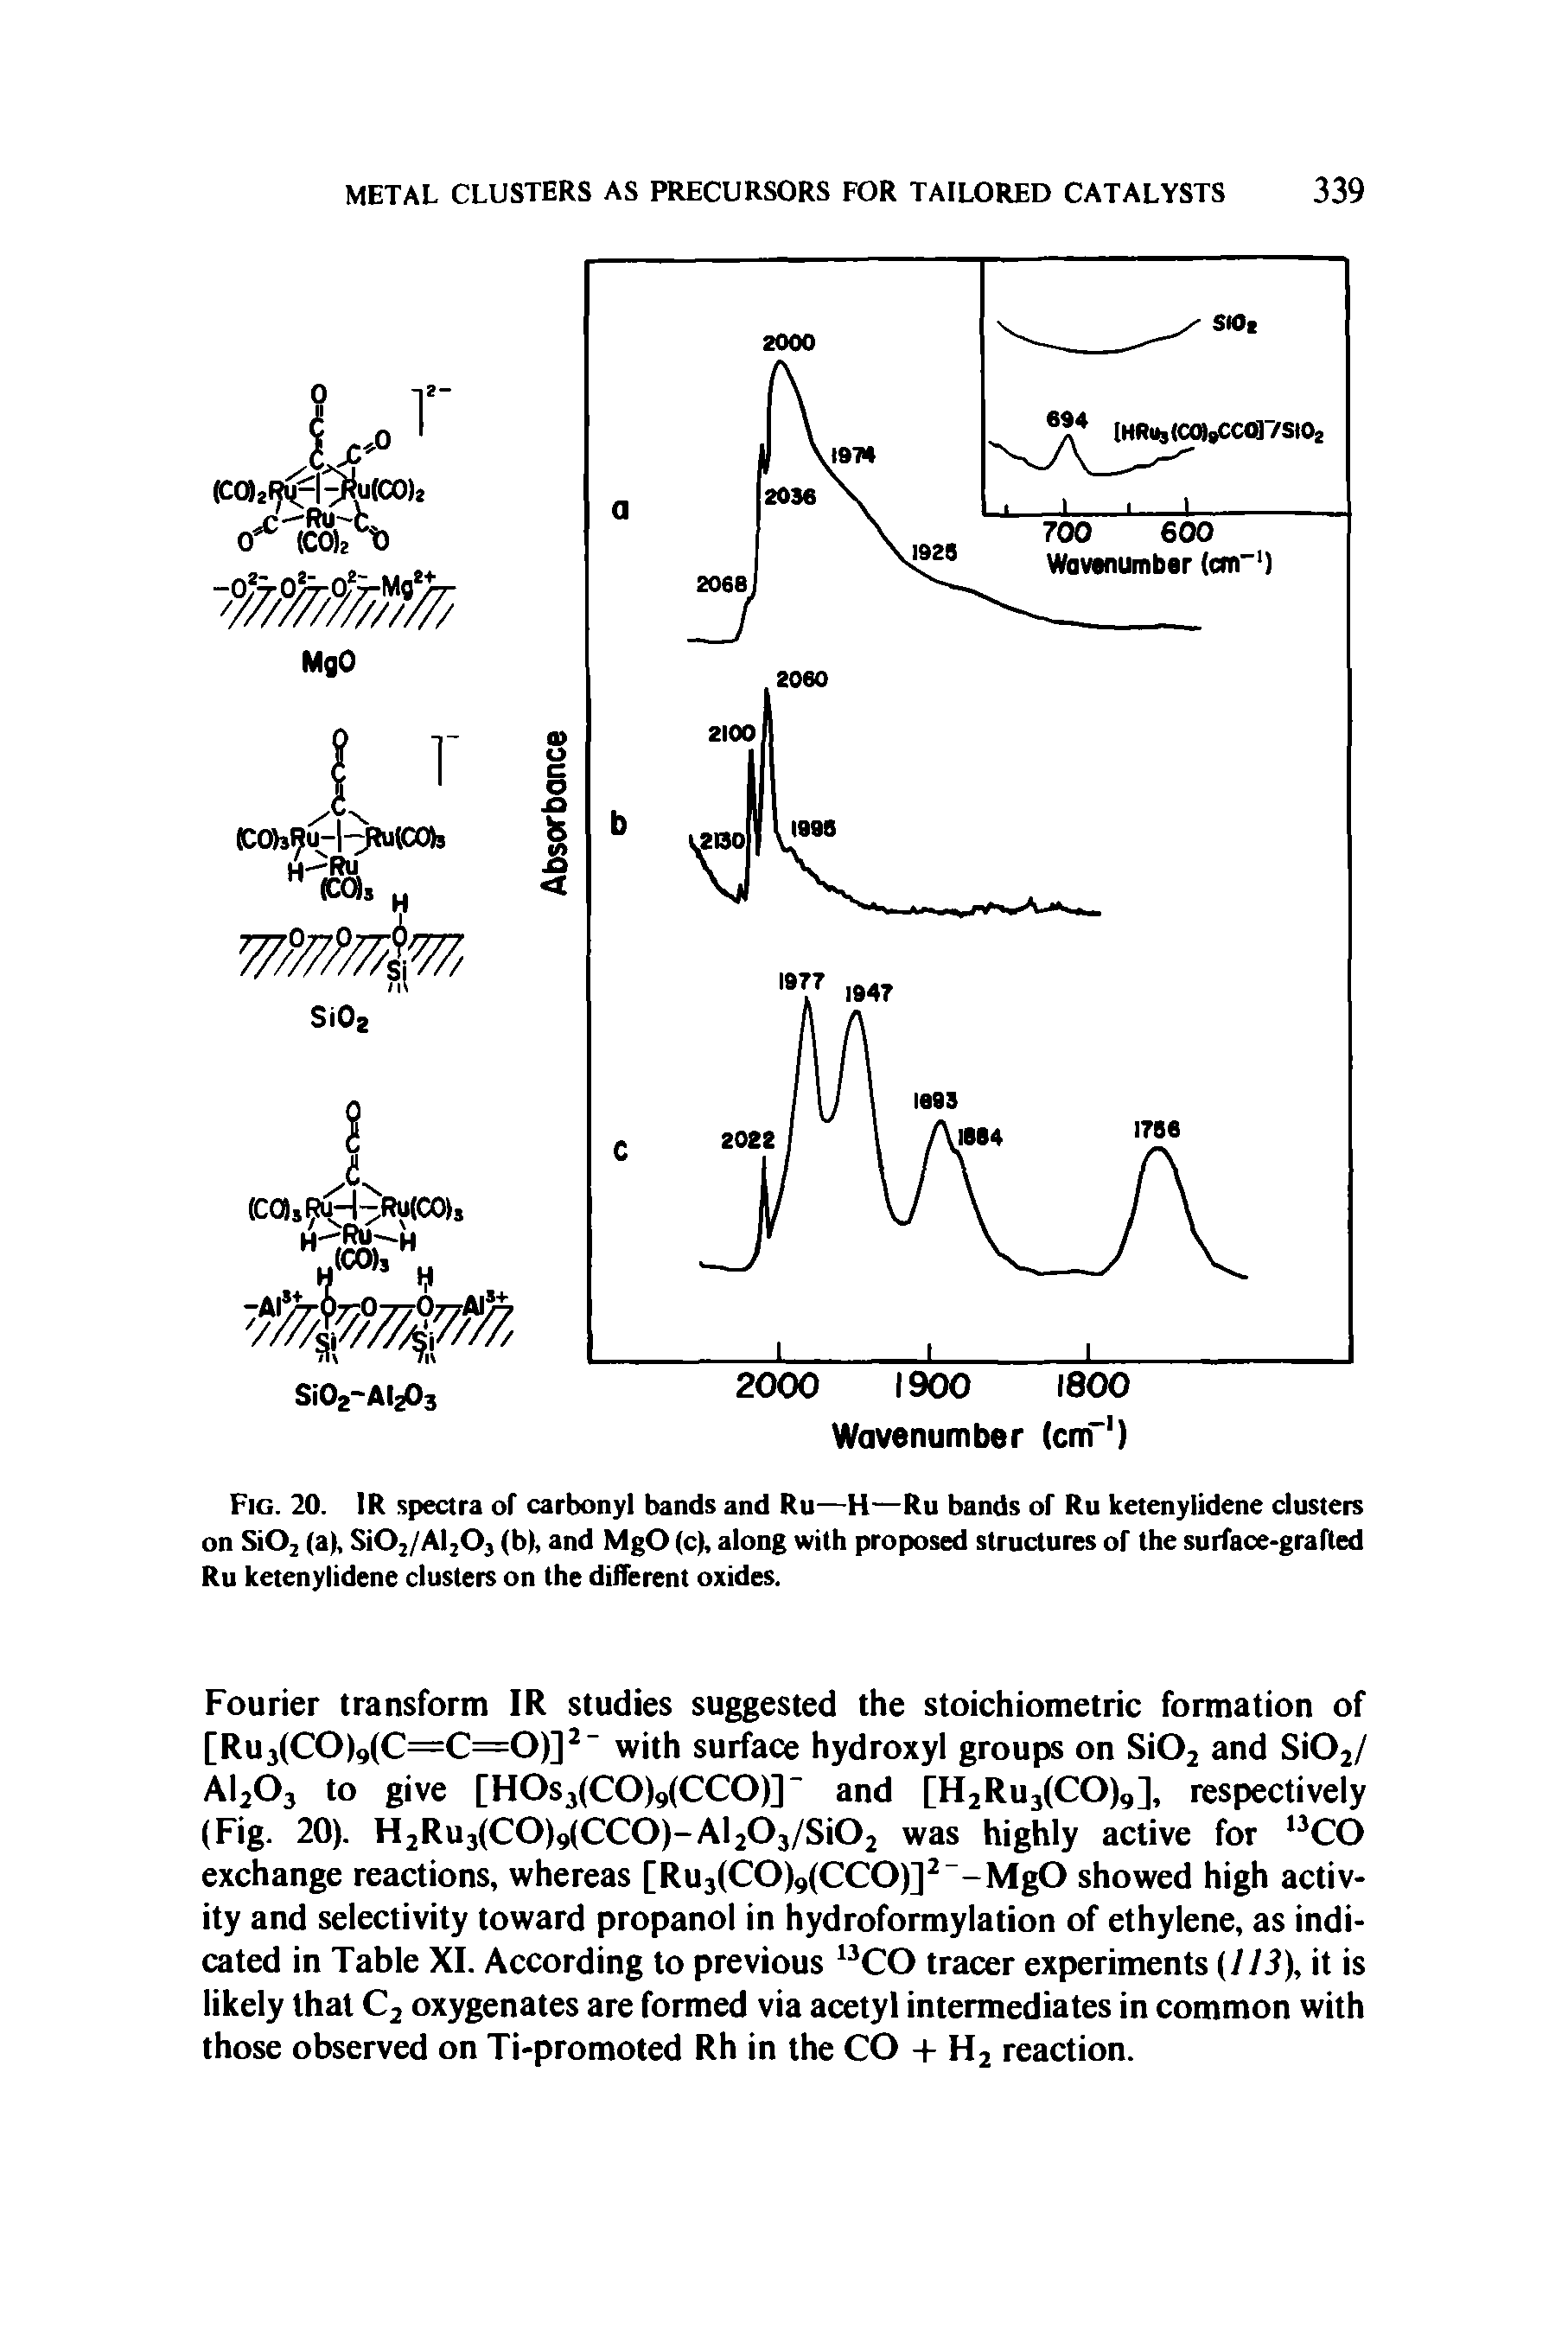 Fig. 20. IR spectra of carbonyl bands and Ru—H—Ru bands ol Ru ketenylidene clusters on SiOj (a), SiOj/AIjO, (b), and MgO (c), along with proposed structures ol the surface-graRed Ru ketenylidene clusters on the diflerent oxides.